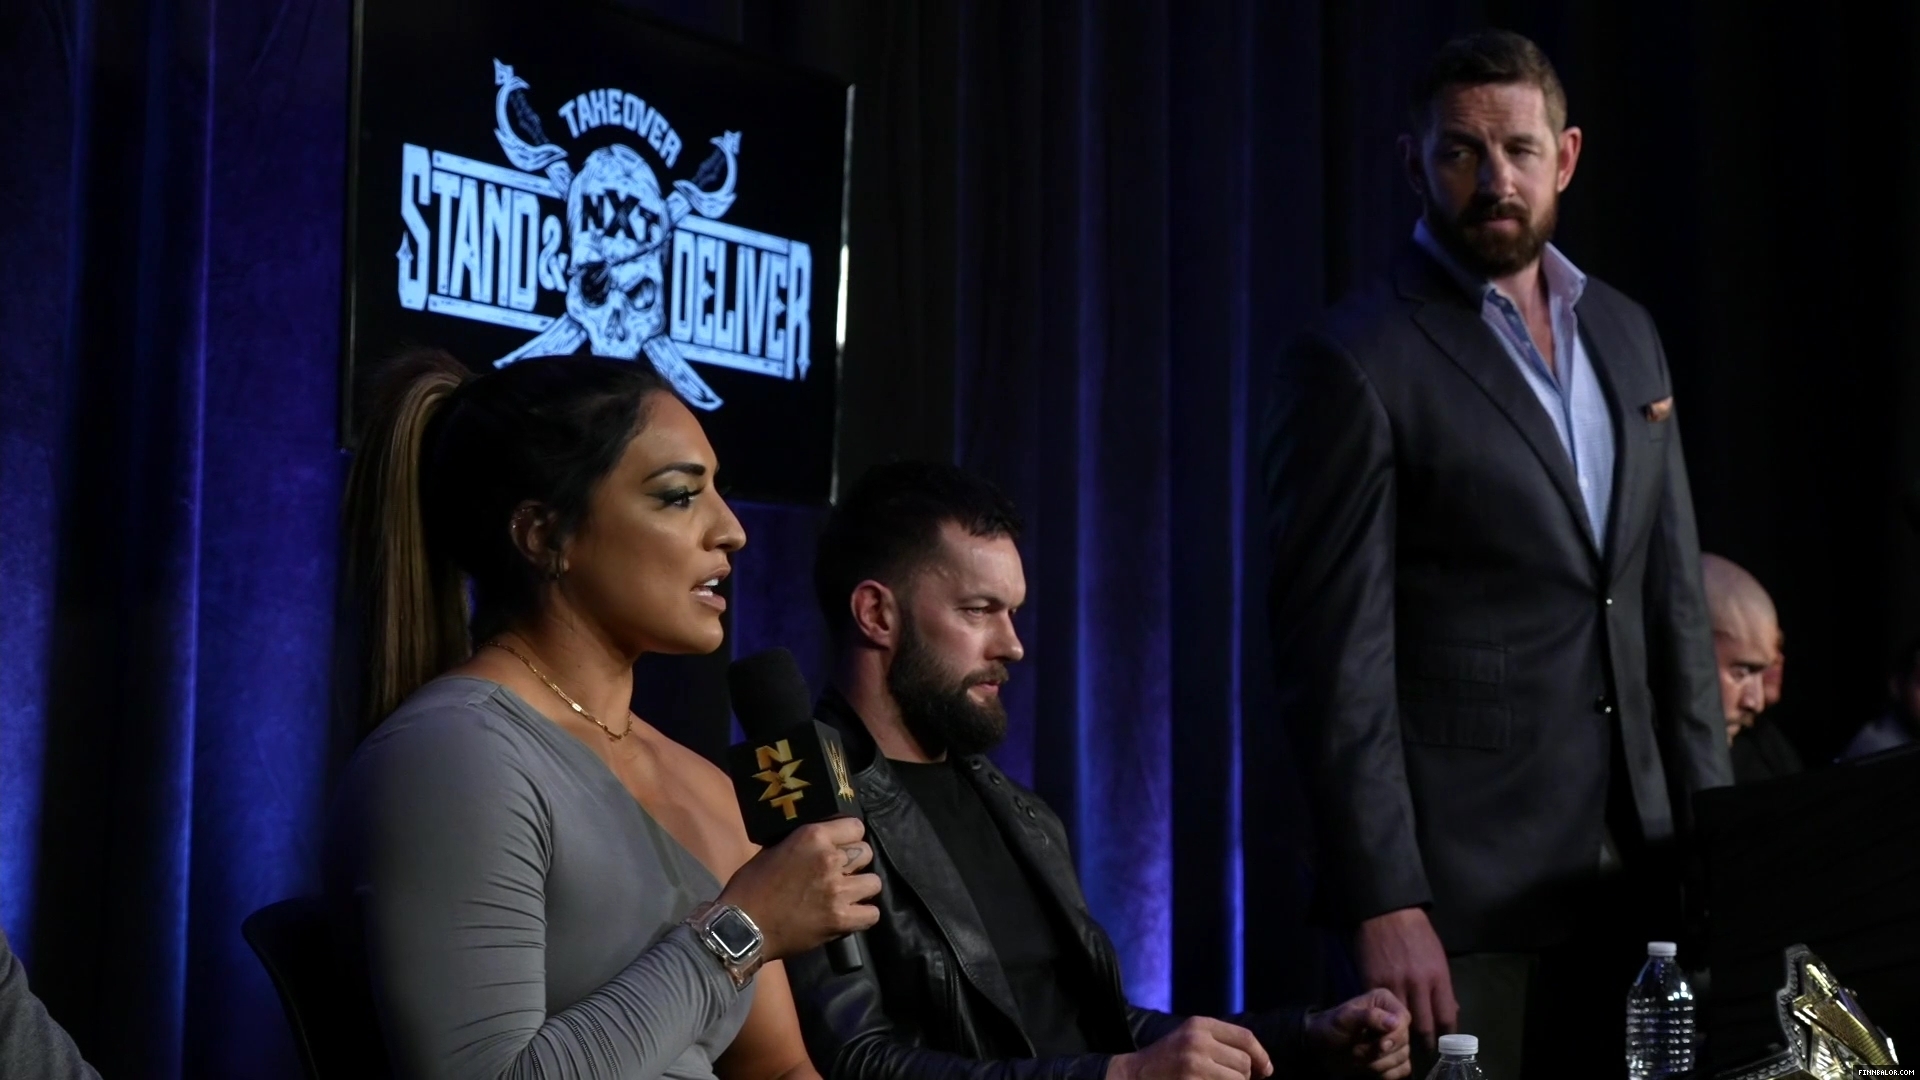 WWE_NXT_TakeOver_Stand_and_Deliver_2021_Global_Press_Conference_1080p_WEB_h264-HEEL_mp41964.jpg